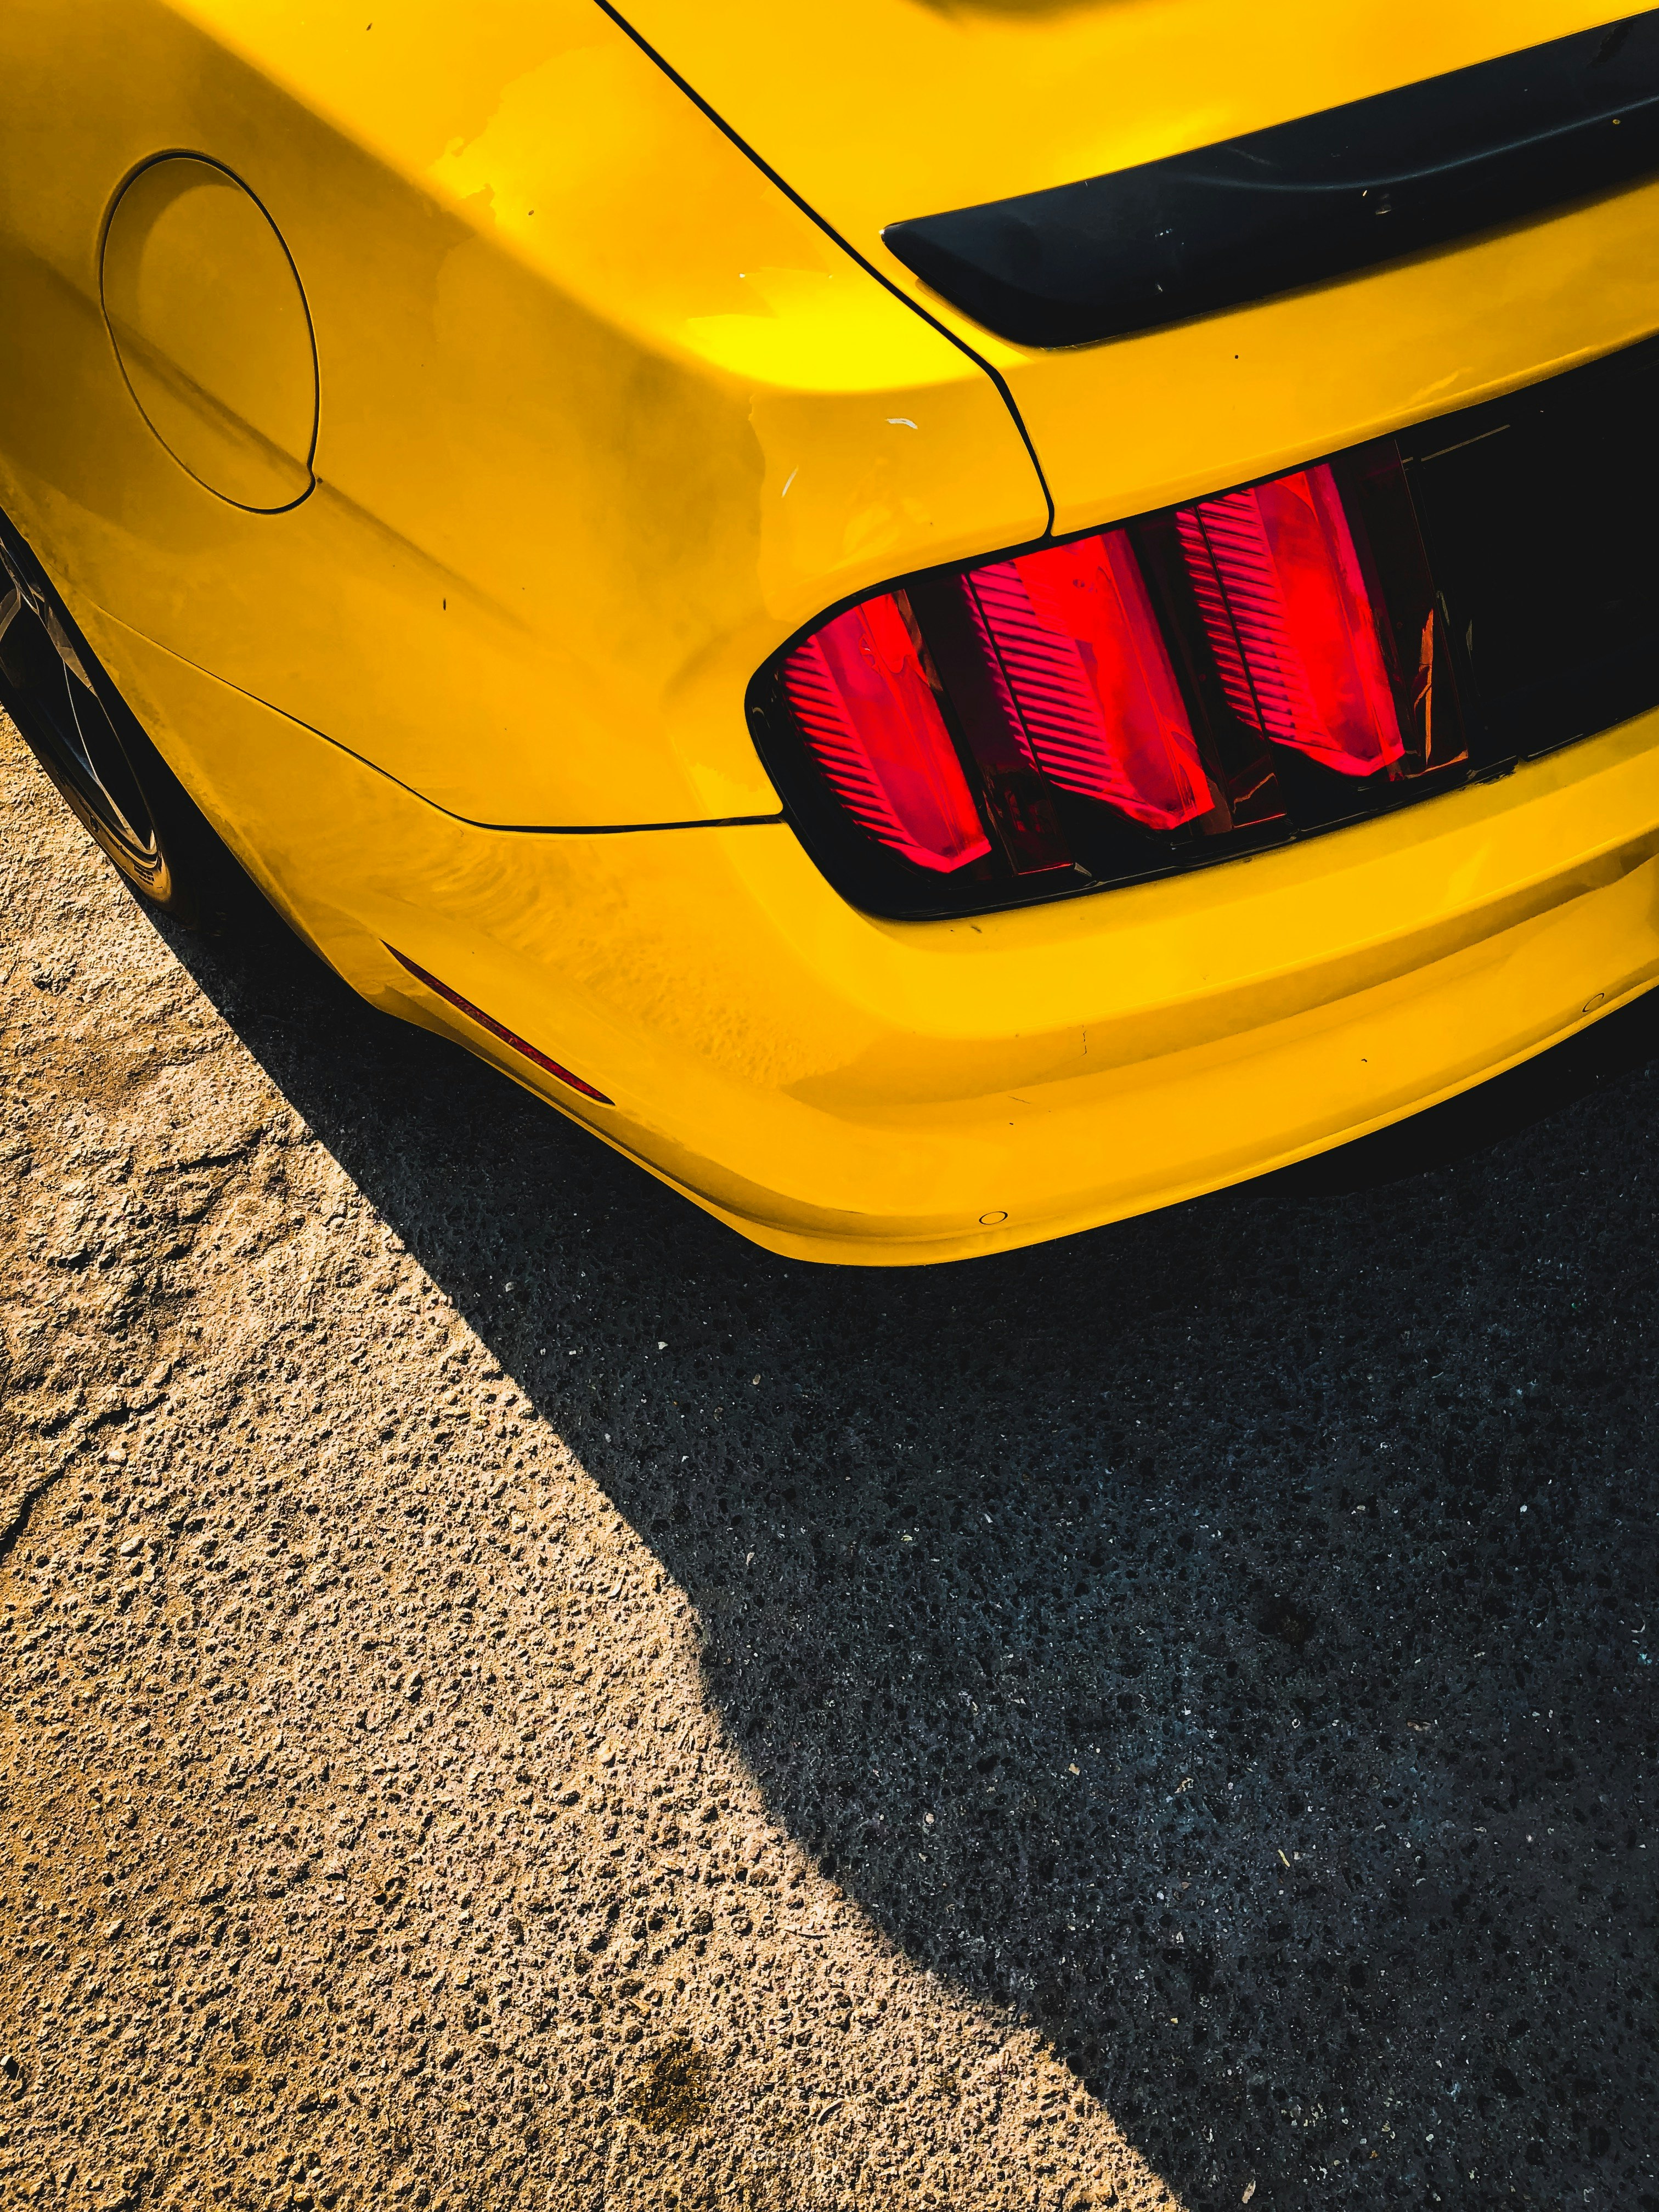 yellow vehicle showing taillight